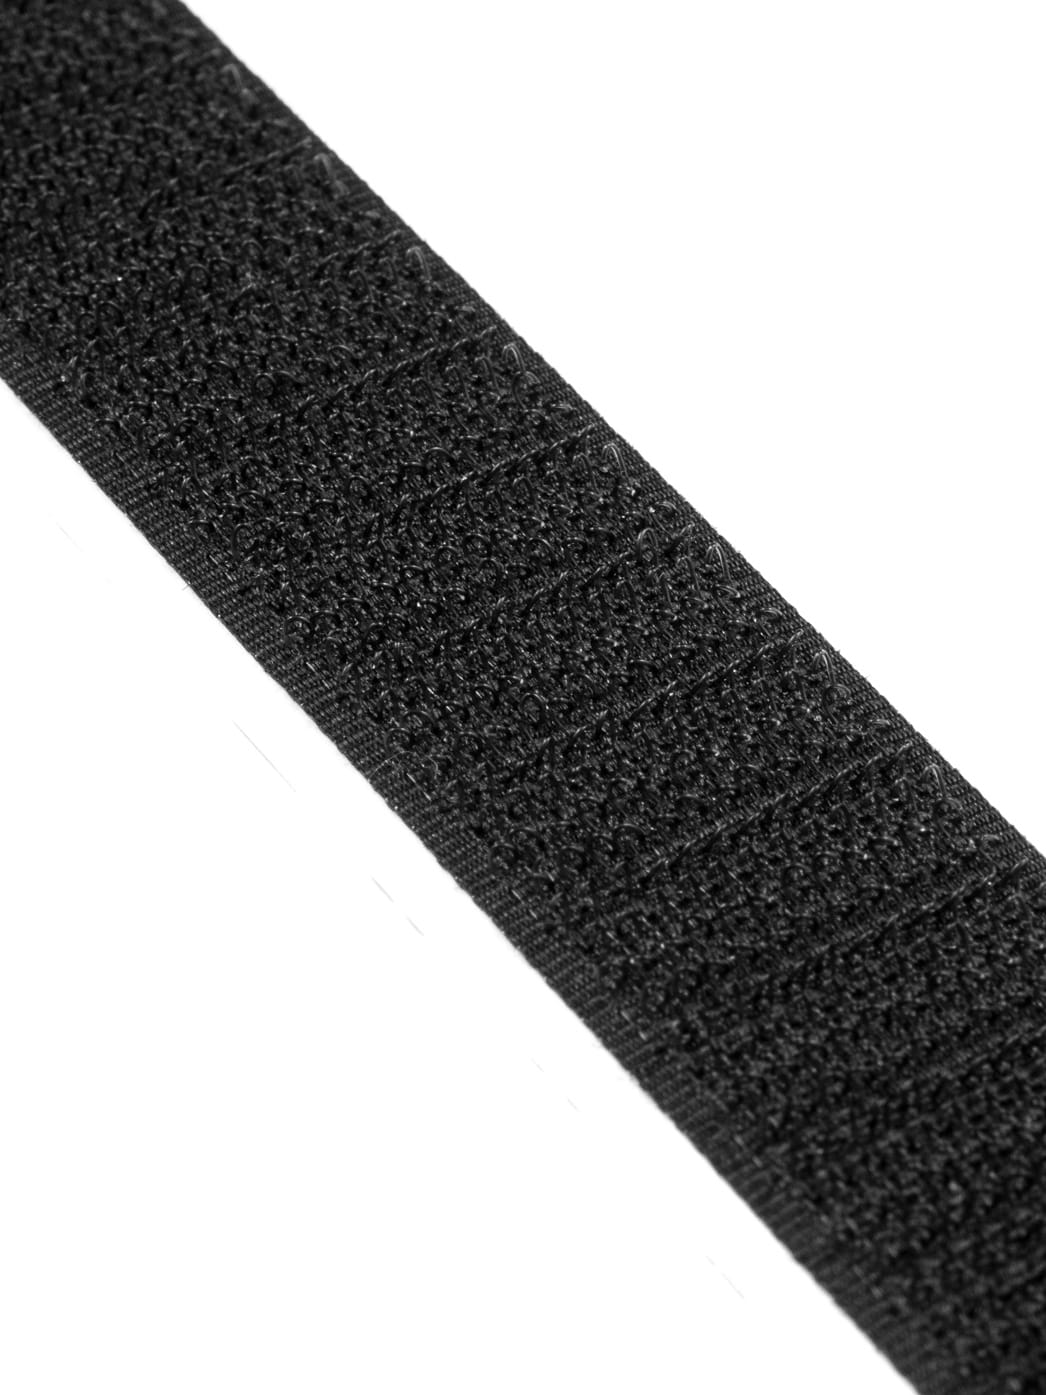 Tape contact Velcro, width 25mm, Velcro Tape, DIY, Hook and Loop, Adhesive  Fastening Tape Nylon Buttons